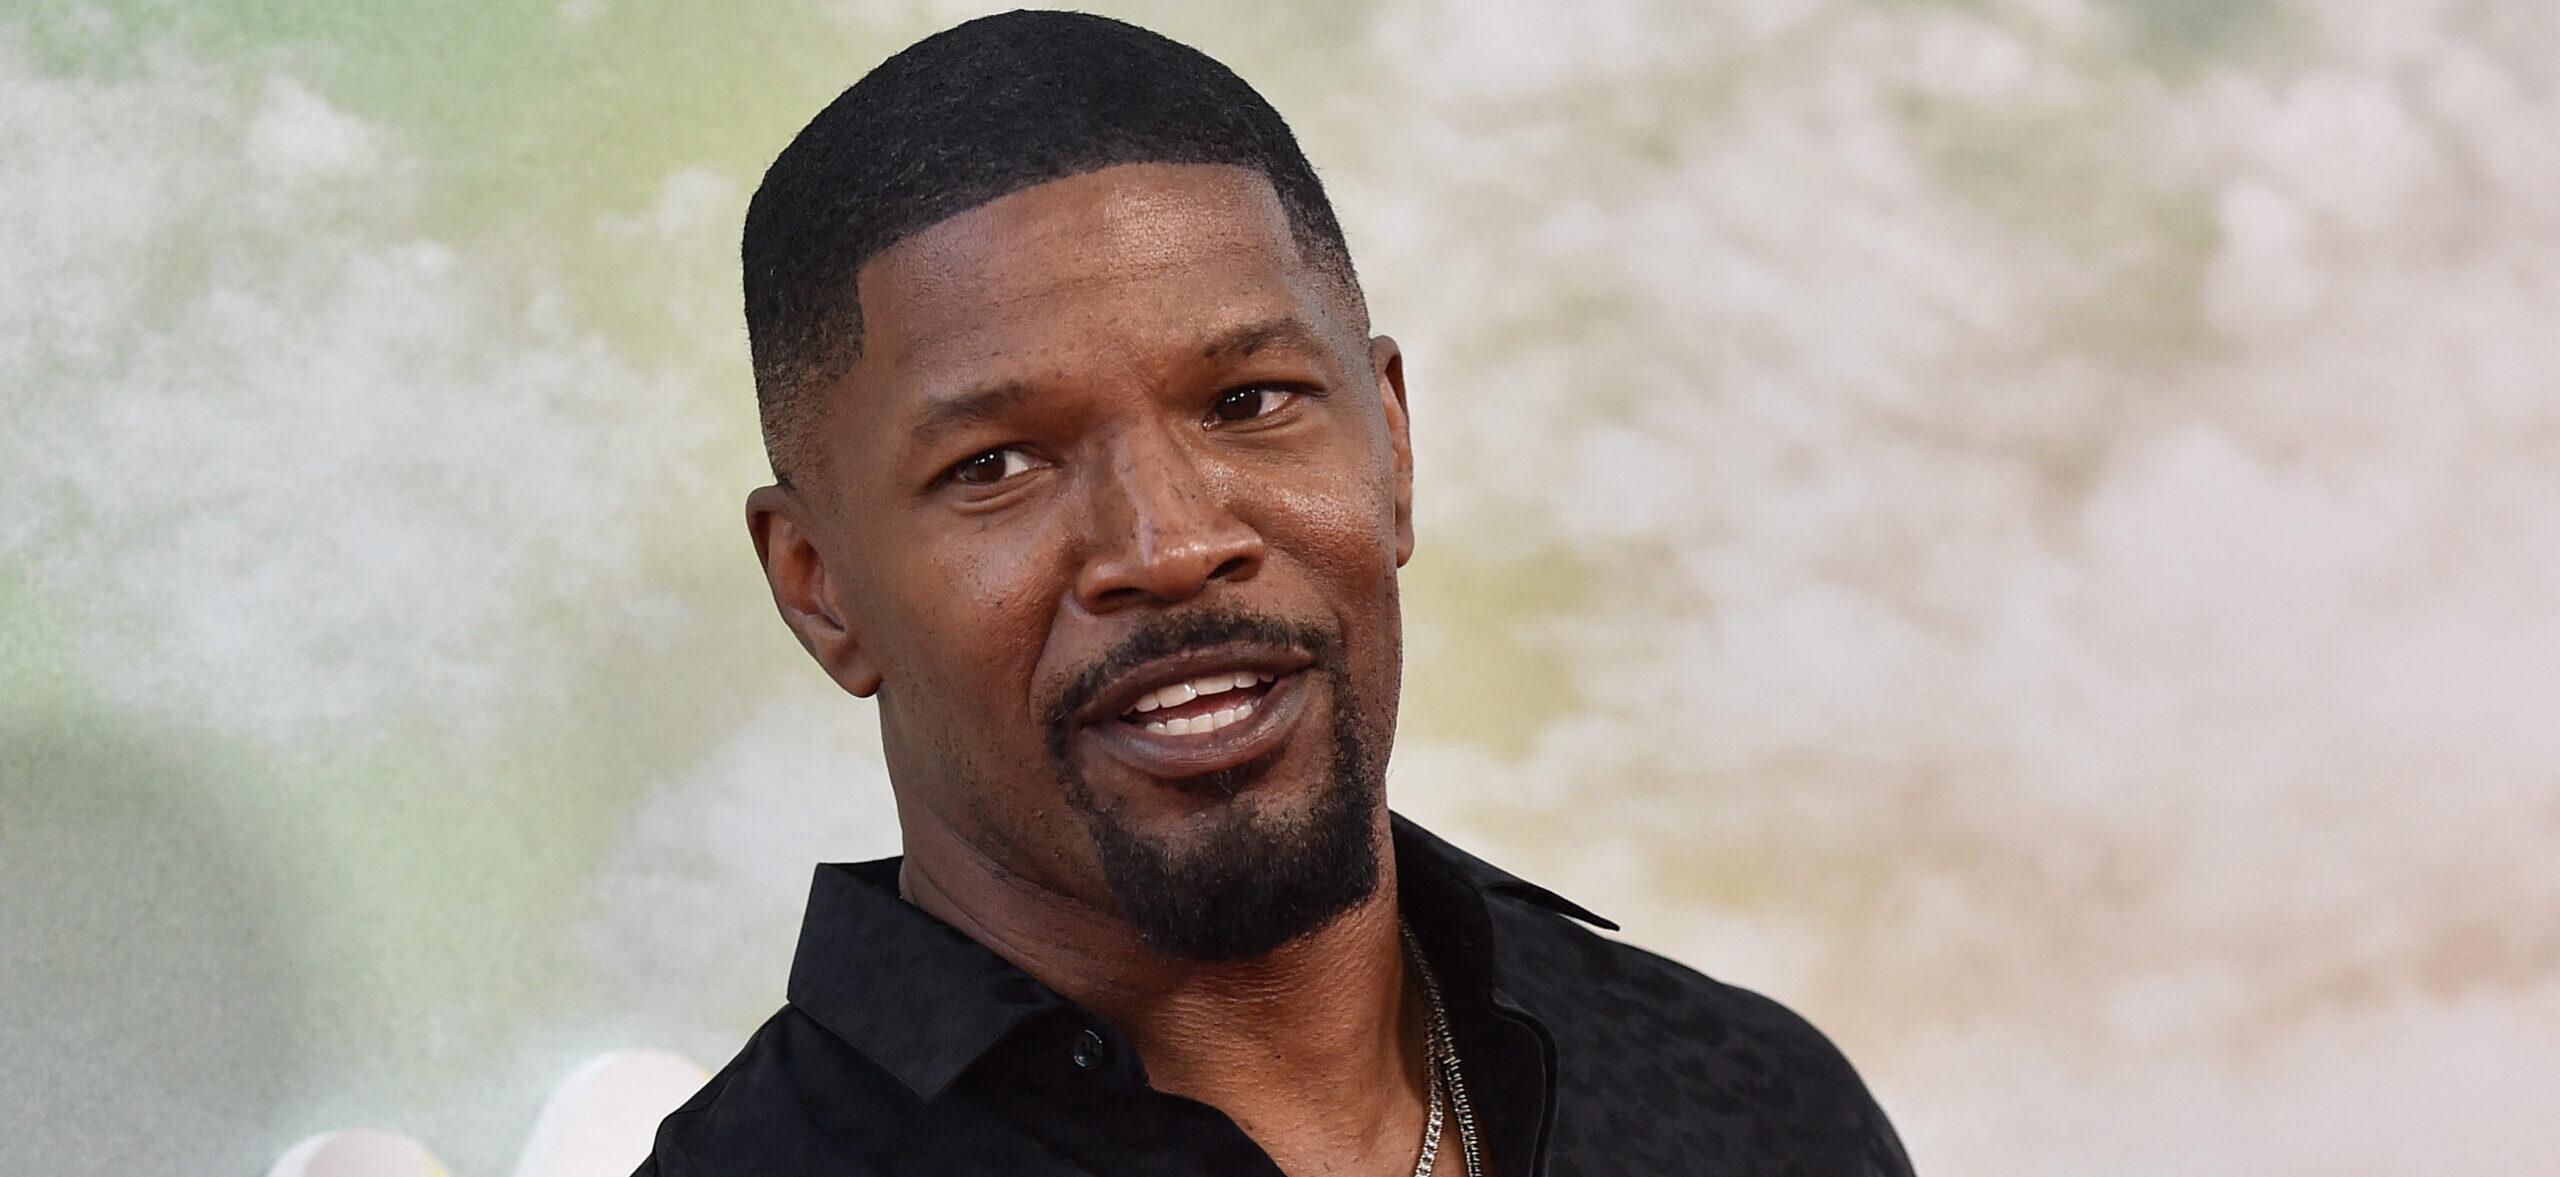 Jamie Foxx Spotted Returning Lost Purse To A Woman After Recovering From A Mystery Illness